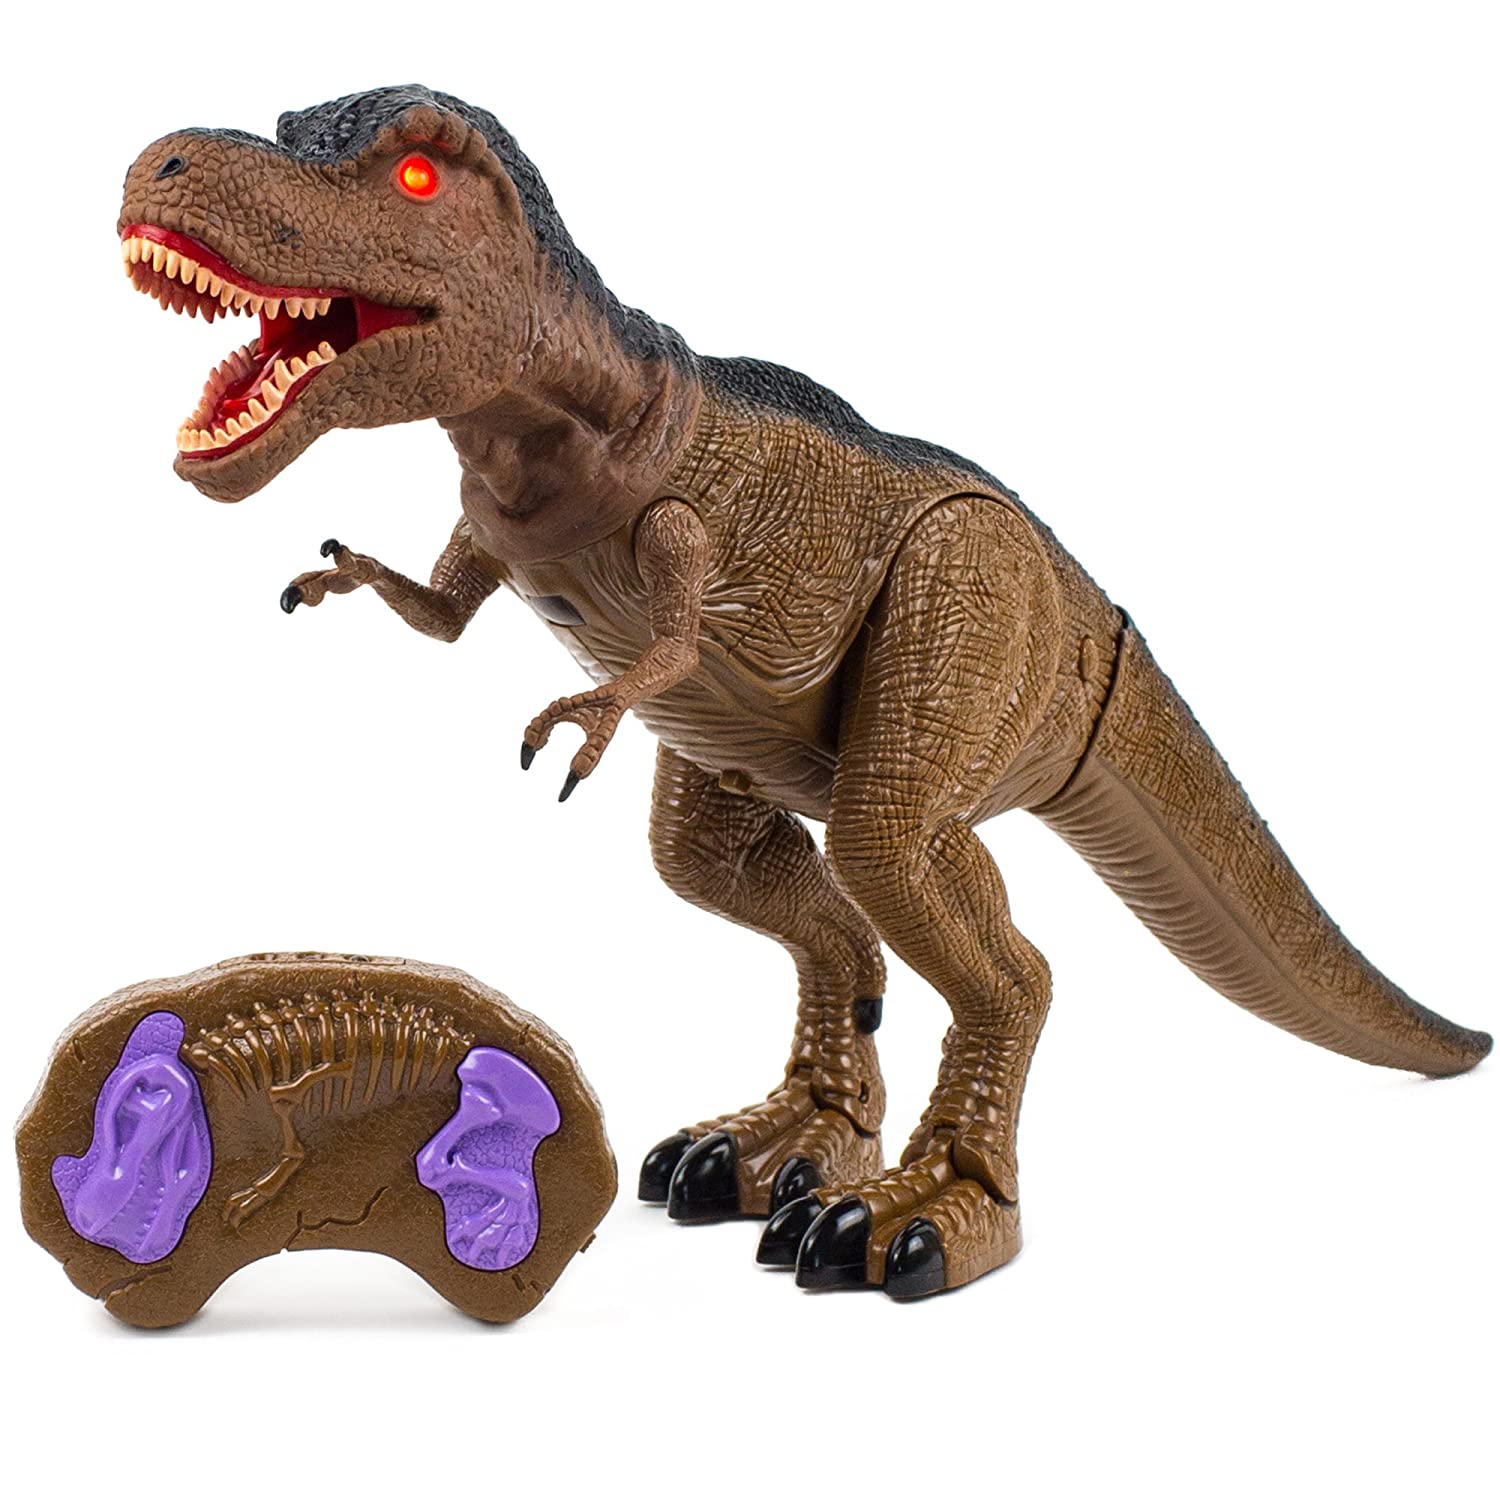 Top 7 Best Robot Dinosaur Toys Reviews in 2023 4